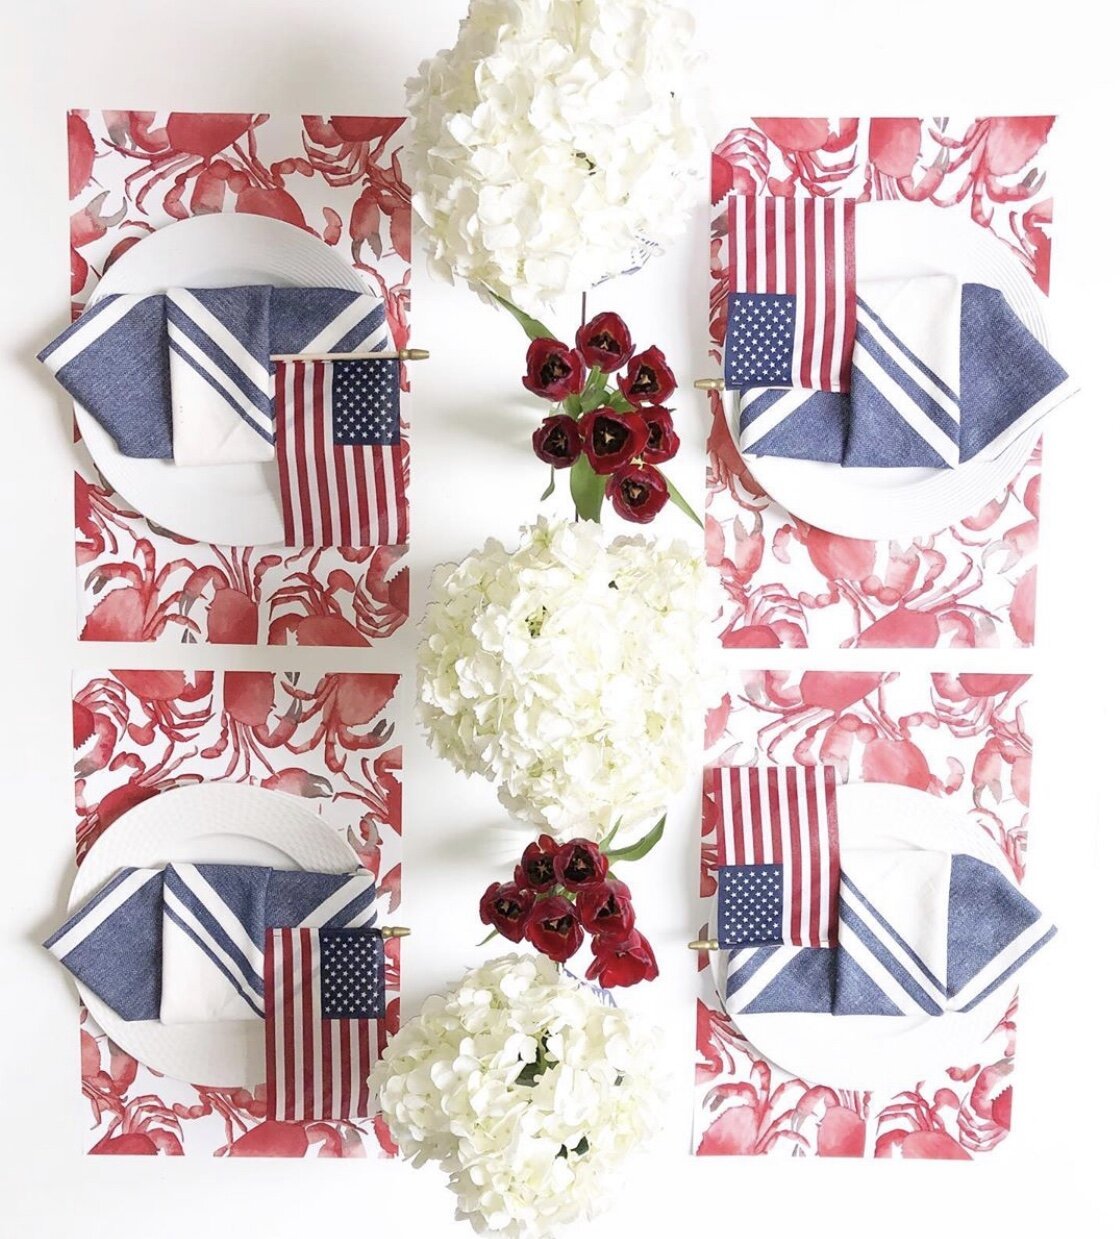 Four place settings on a white table with crab paper placemats, mini American flags and red and white flowers